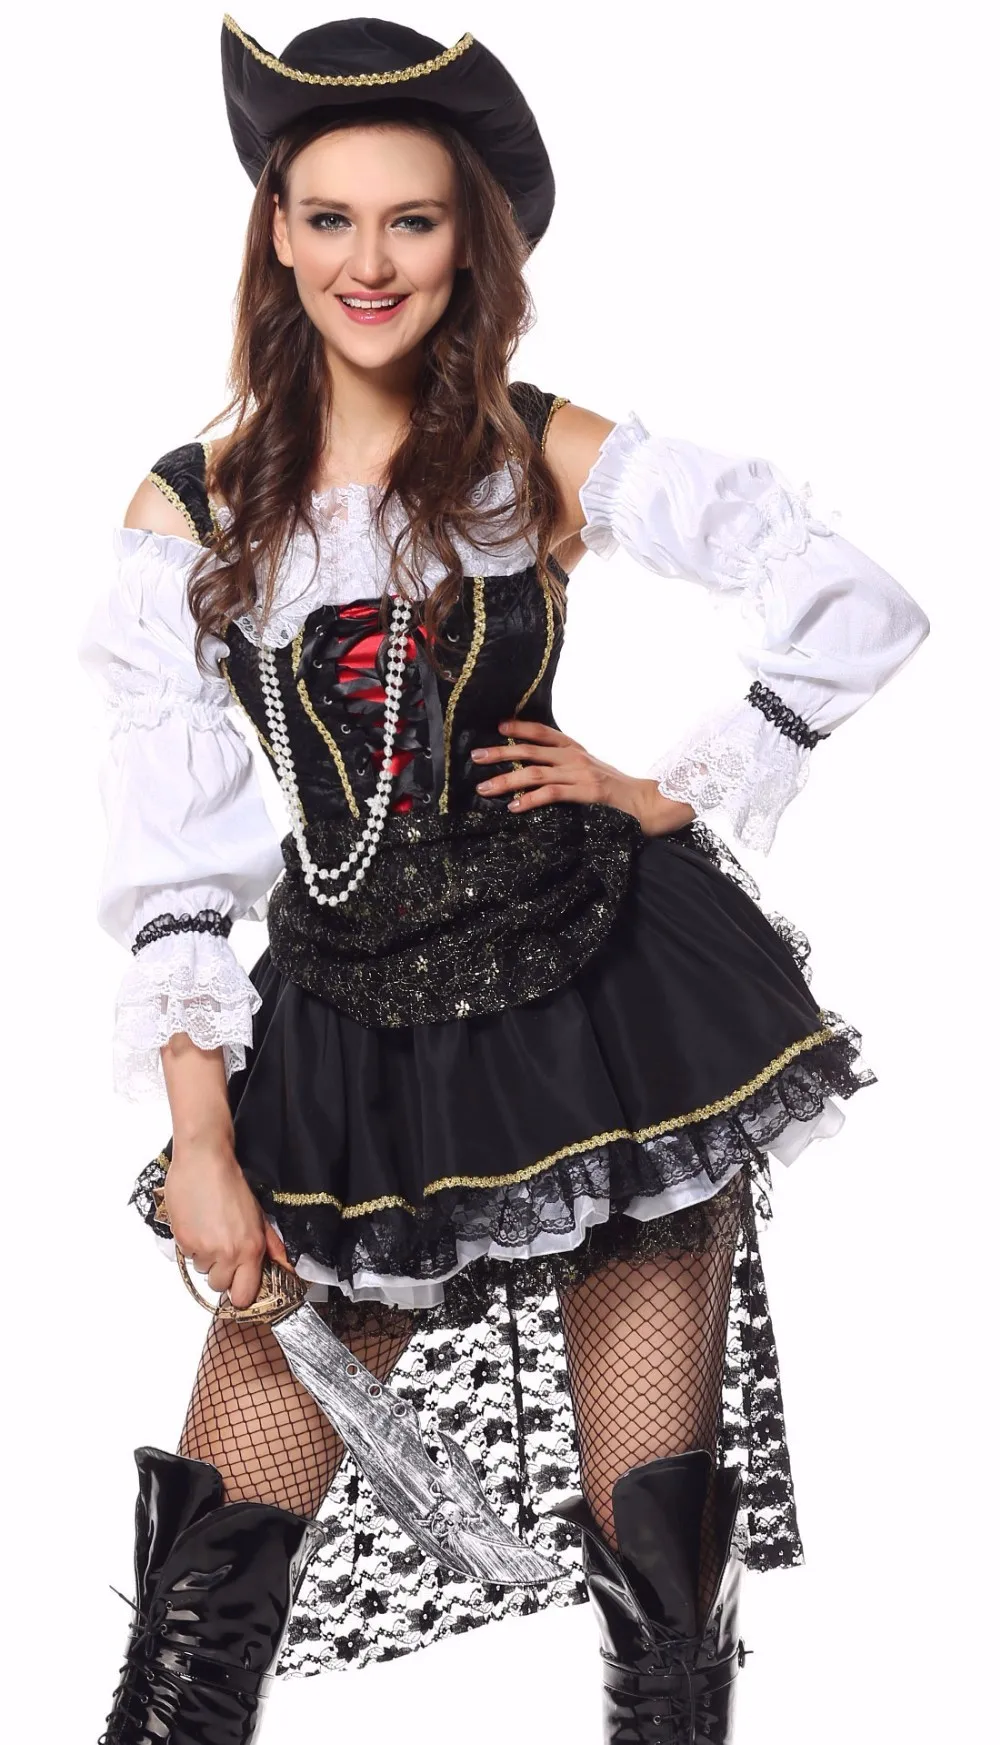 Super Cute Maid Cosplay Sexy Party Maidservan Dress